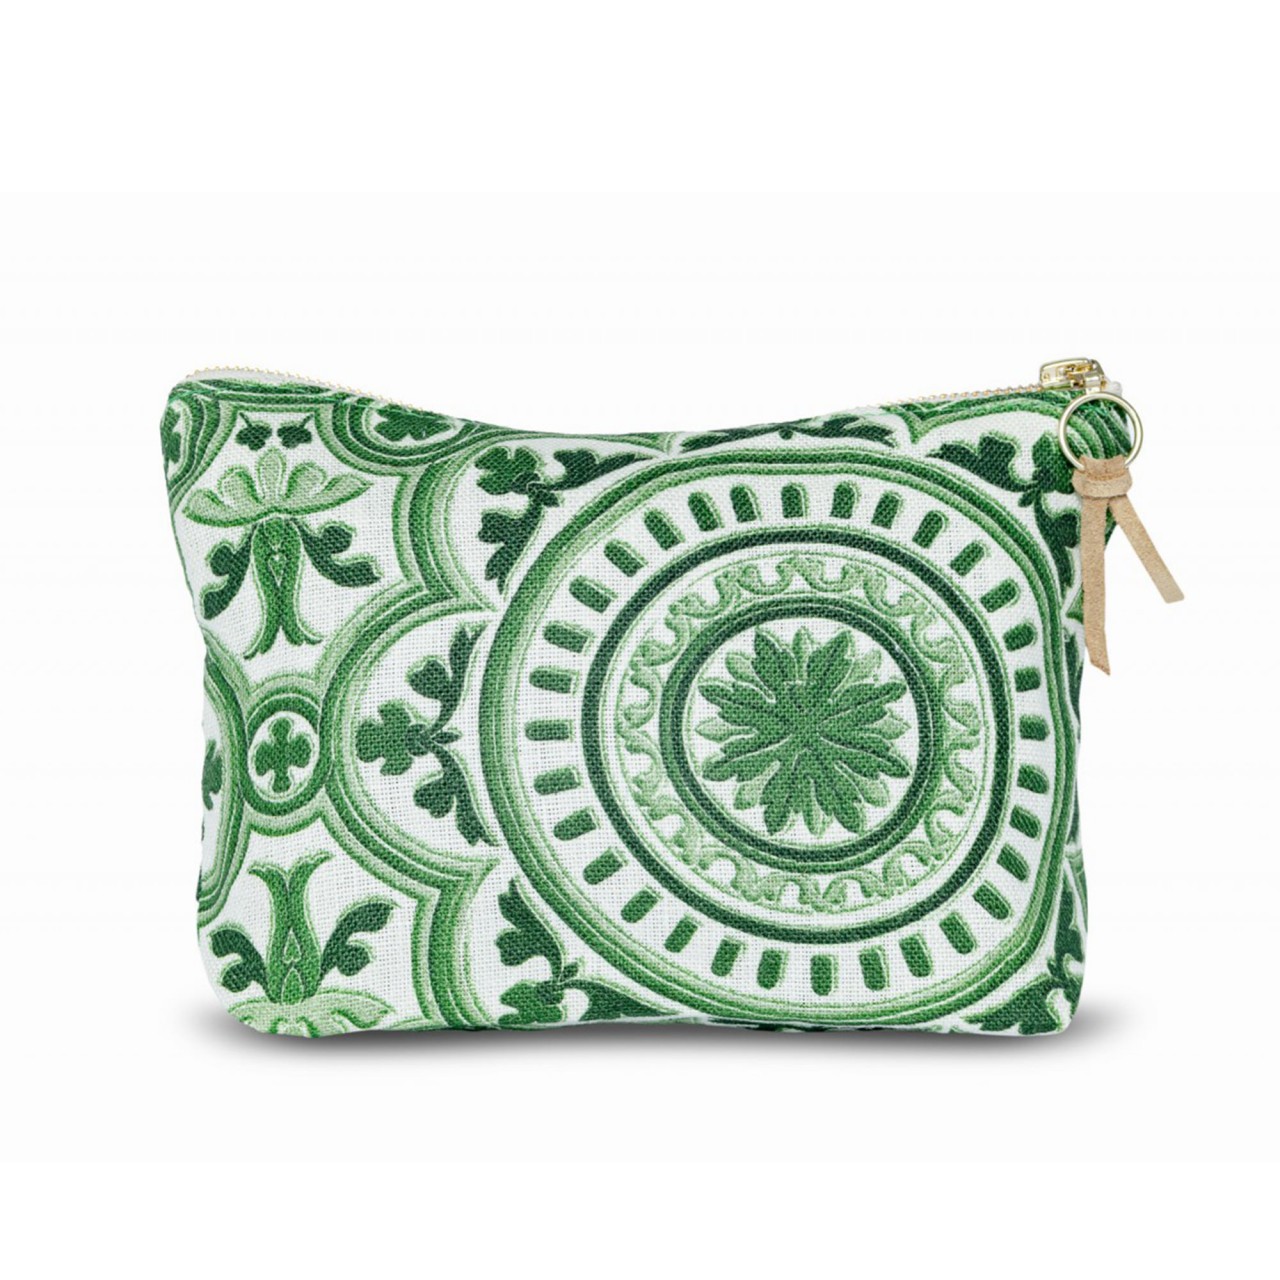 THE MANOR Linen Wash Bag 